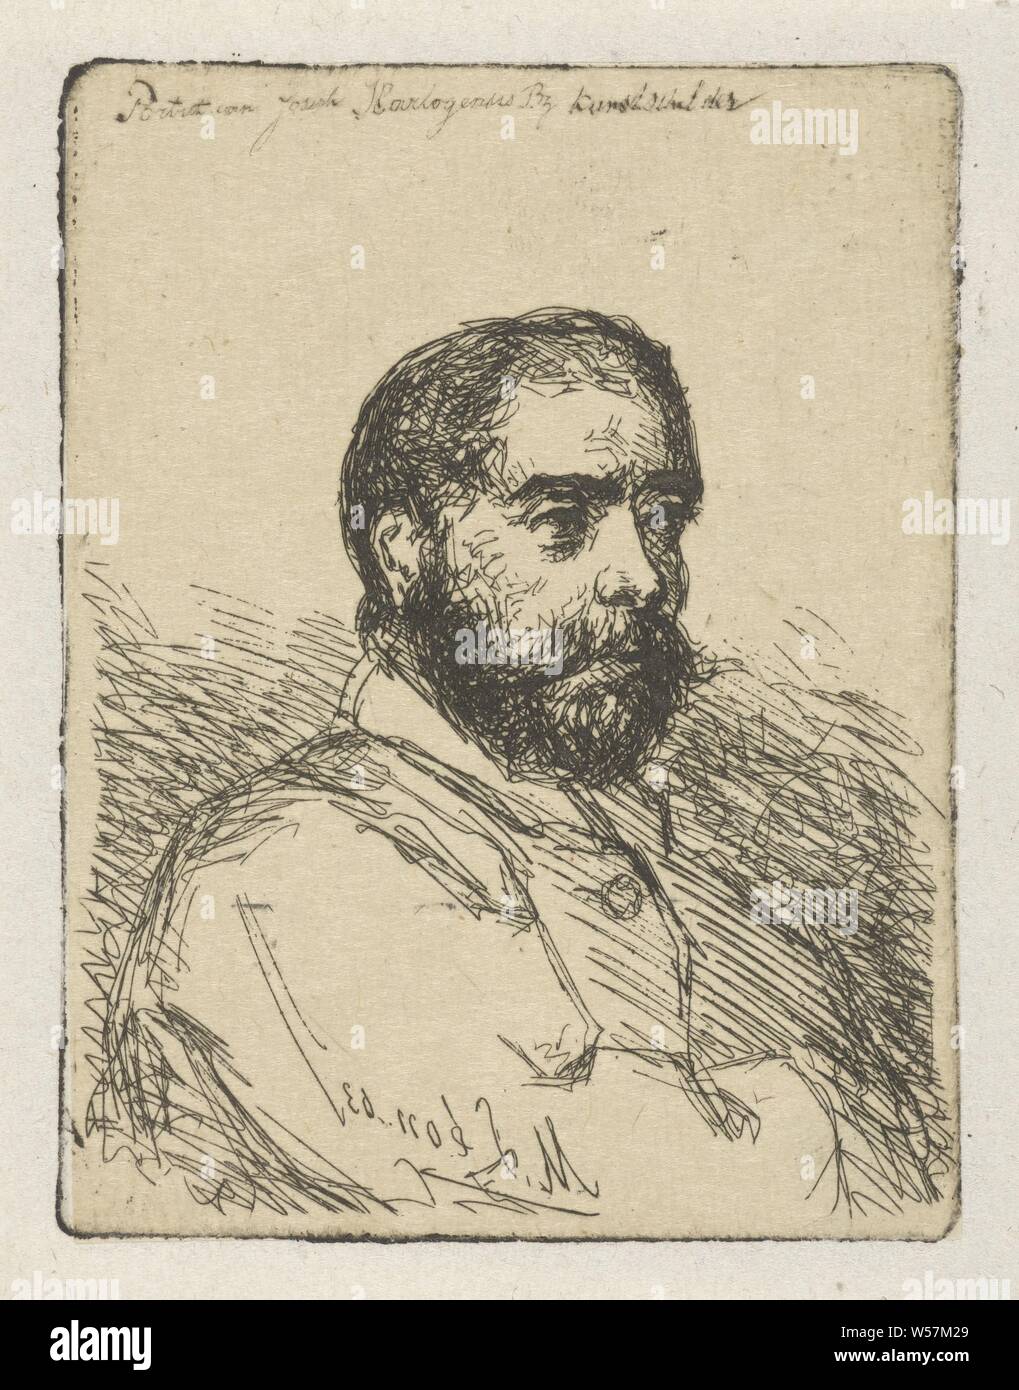 Portrait of Joseph Hartogensis Portrait of Joseph Hartogensis by painter (title on object), Portrait bust to the right of the artist Joseph Hartogensis, bareheaded and bearded, Joseph Hartogensis, Maurits Leon (mentioned on object), 1863, paper, etching, h 82 mm × w 63 mm Stock Photo